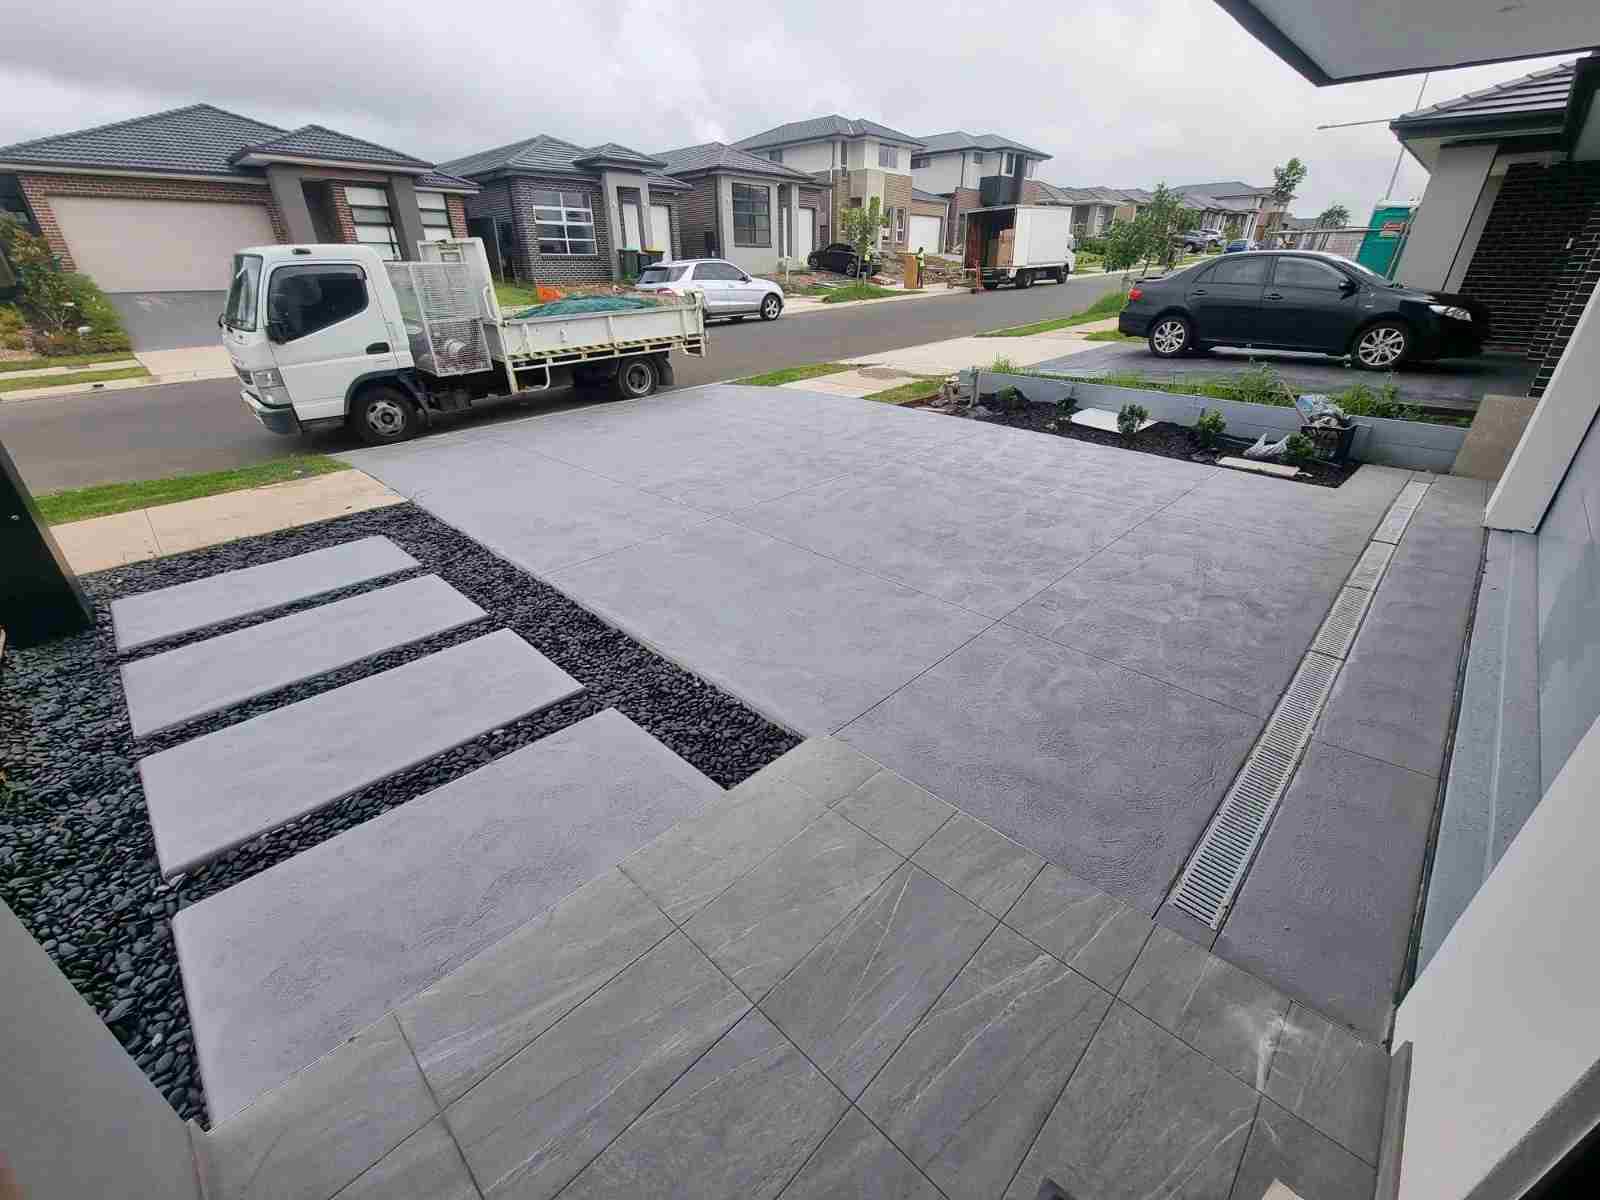 Local Concrete Fairfield NSW 2165 Solutions For Your Home